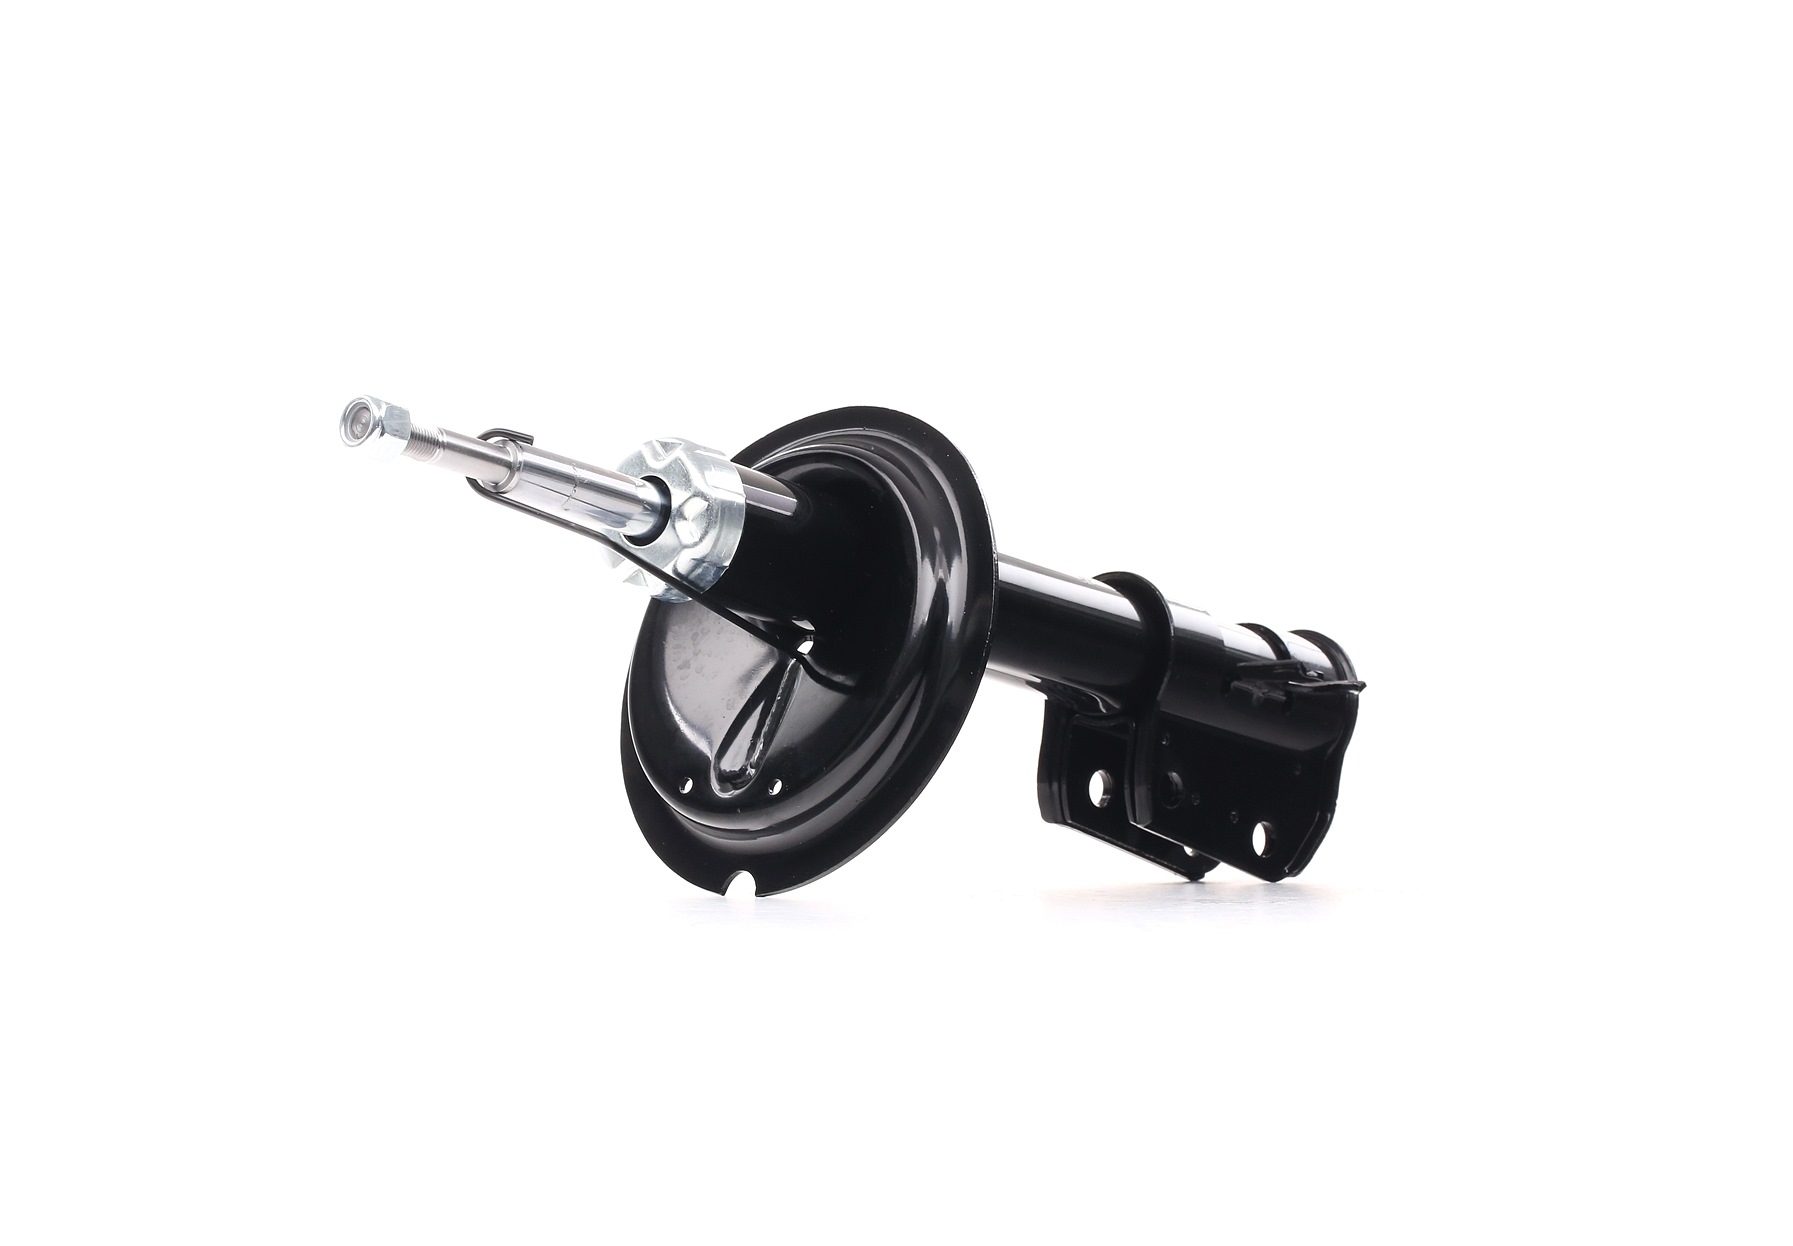 RIDEX Front Axle, Gas Pressure, 478x320 mm, Twin-Tube, Suspension Strut, Telescopic Shock Absorber, Top pin, Bottom Clamp Shocks 854S0779 buy